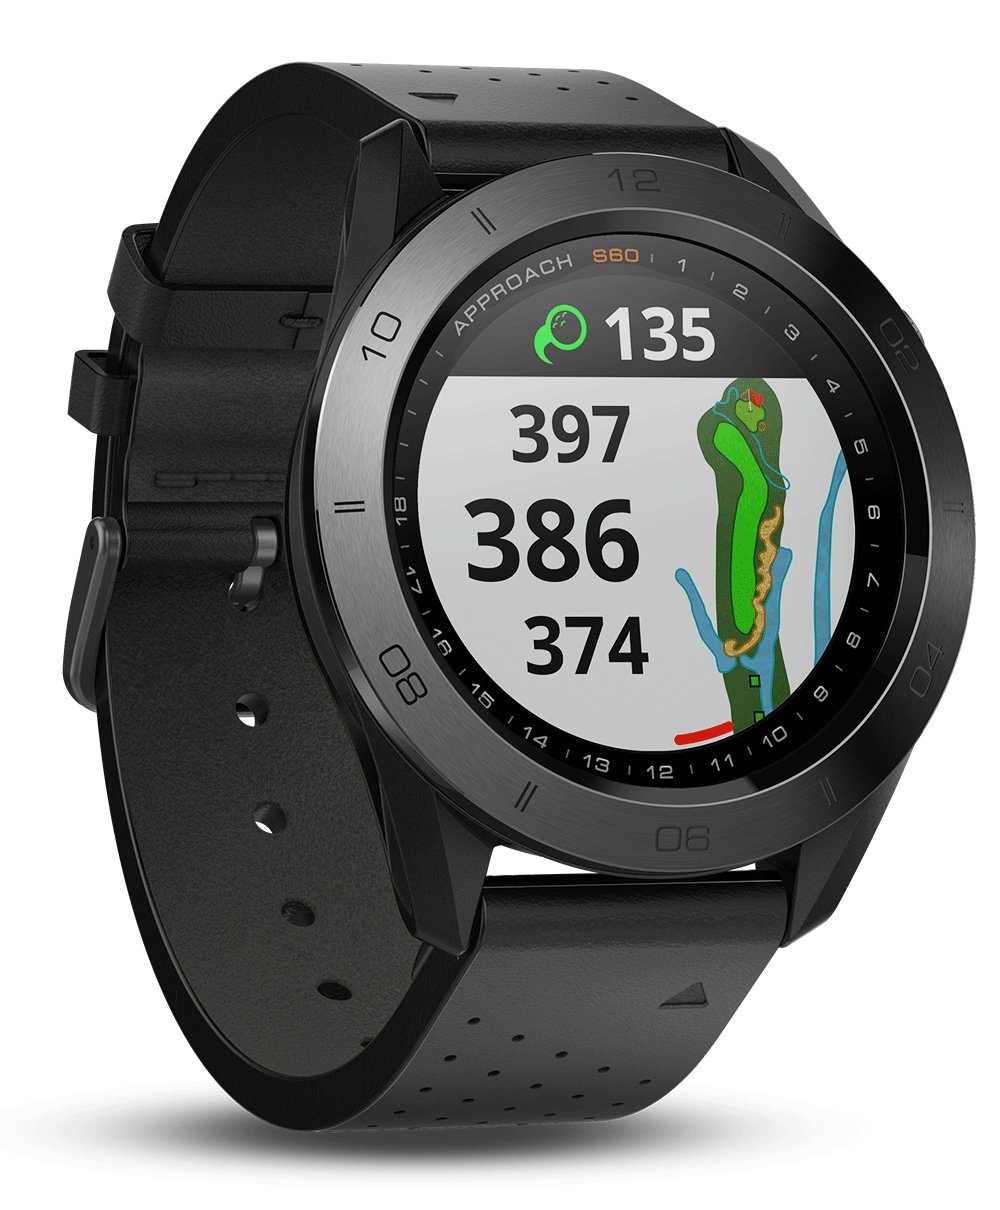 Garmin Approach S60 (Black) Golf GPS Watch with Screen Protector & Charging Adapters Bundle